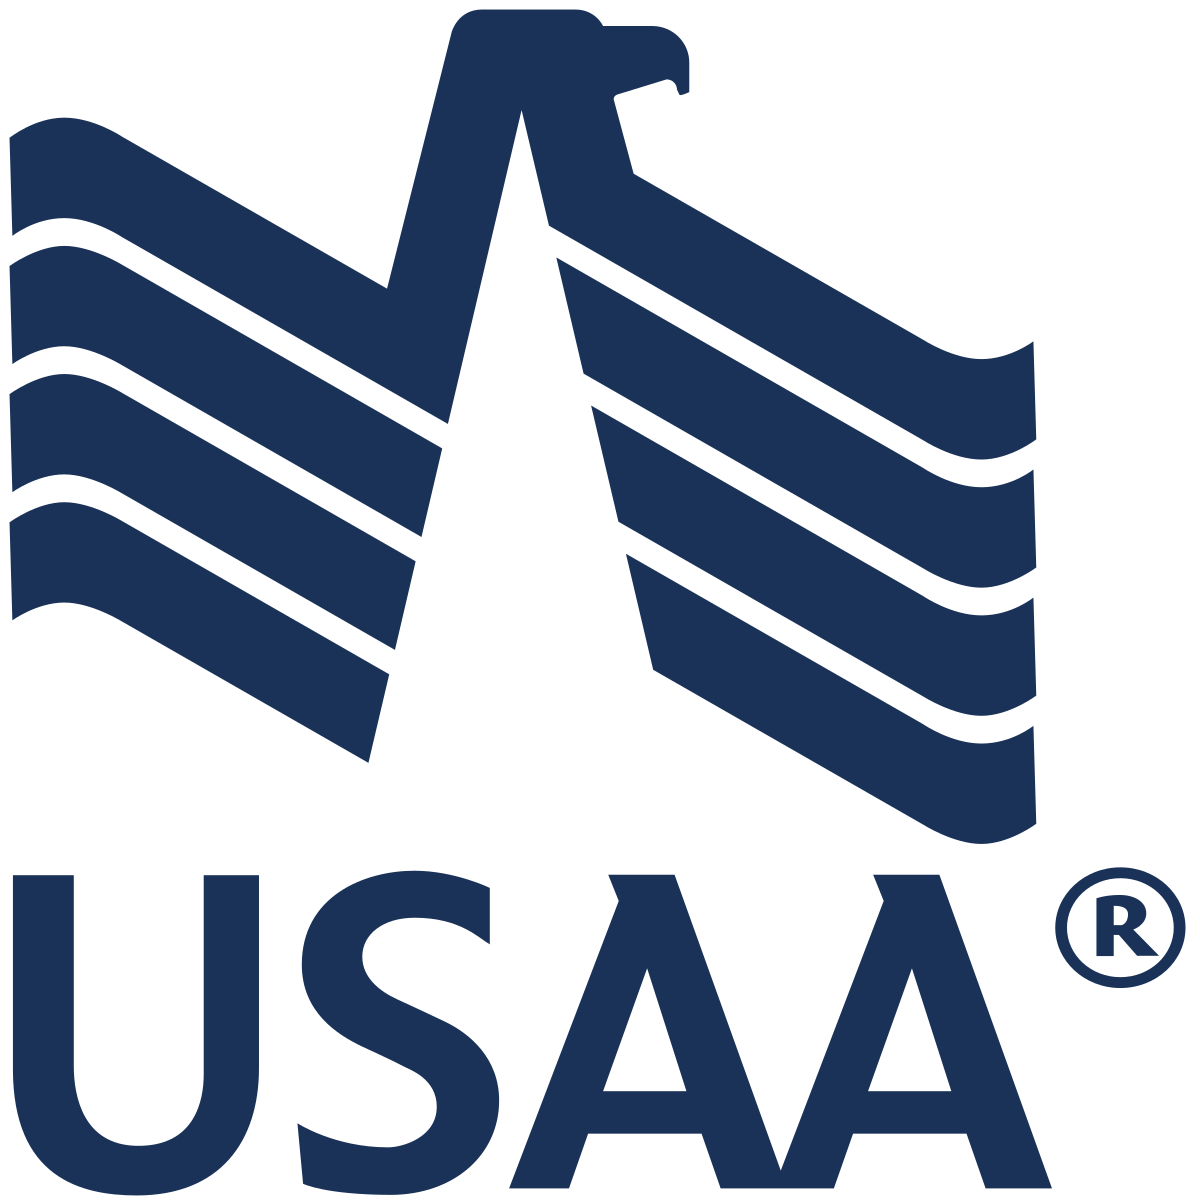 Usaa_logo_PNG2.png